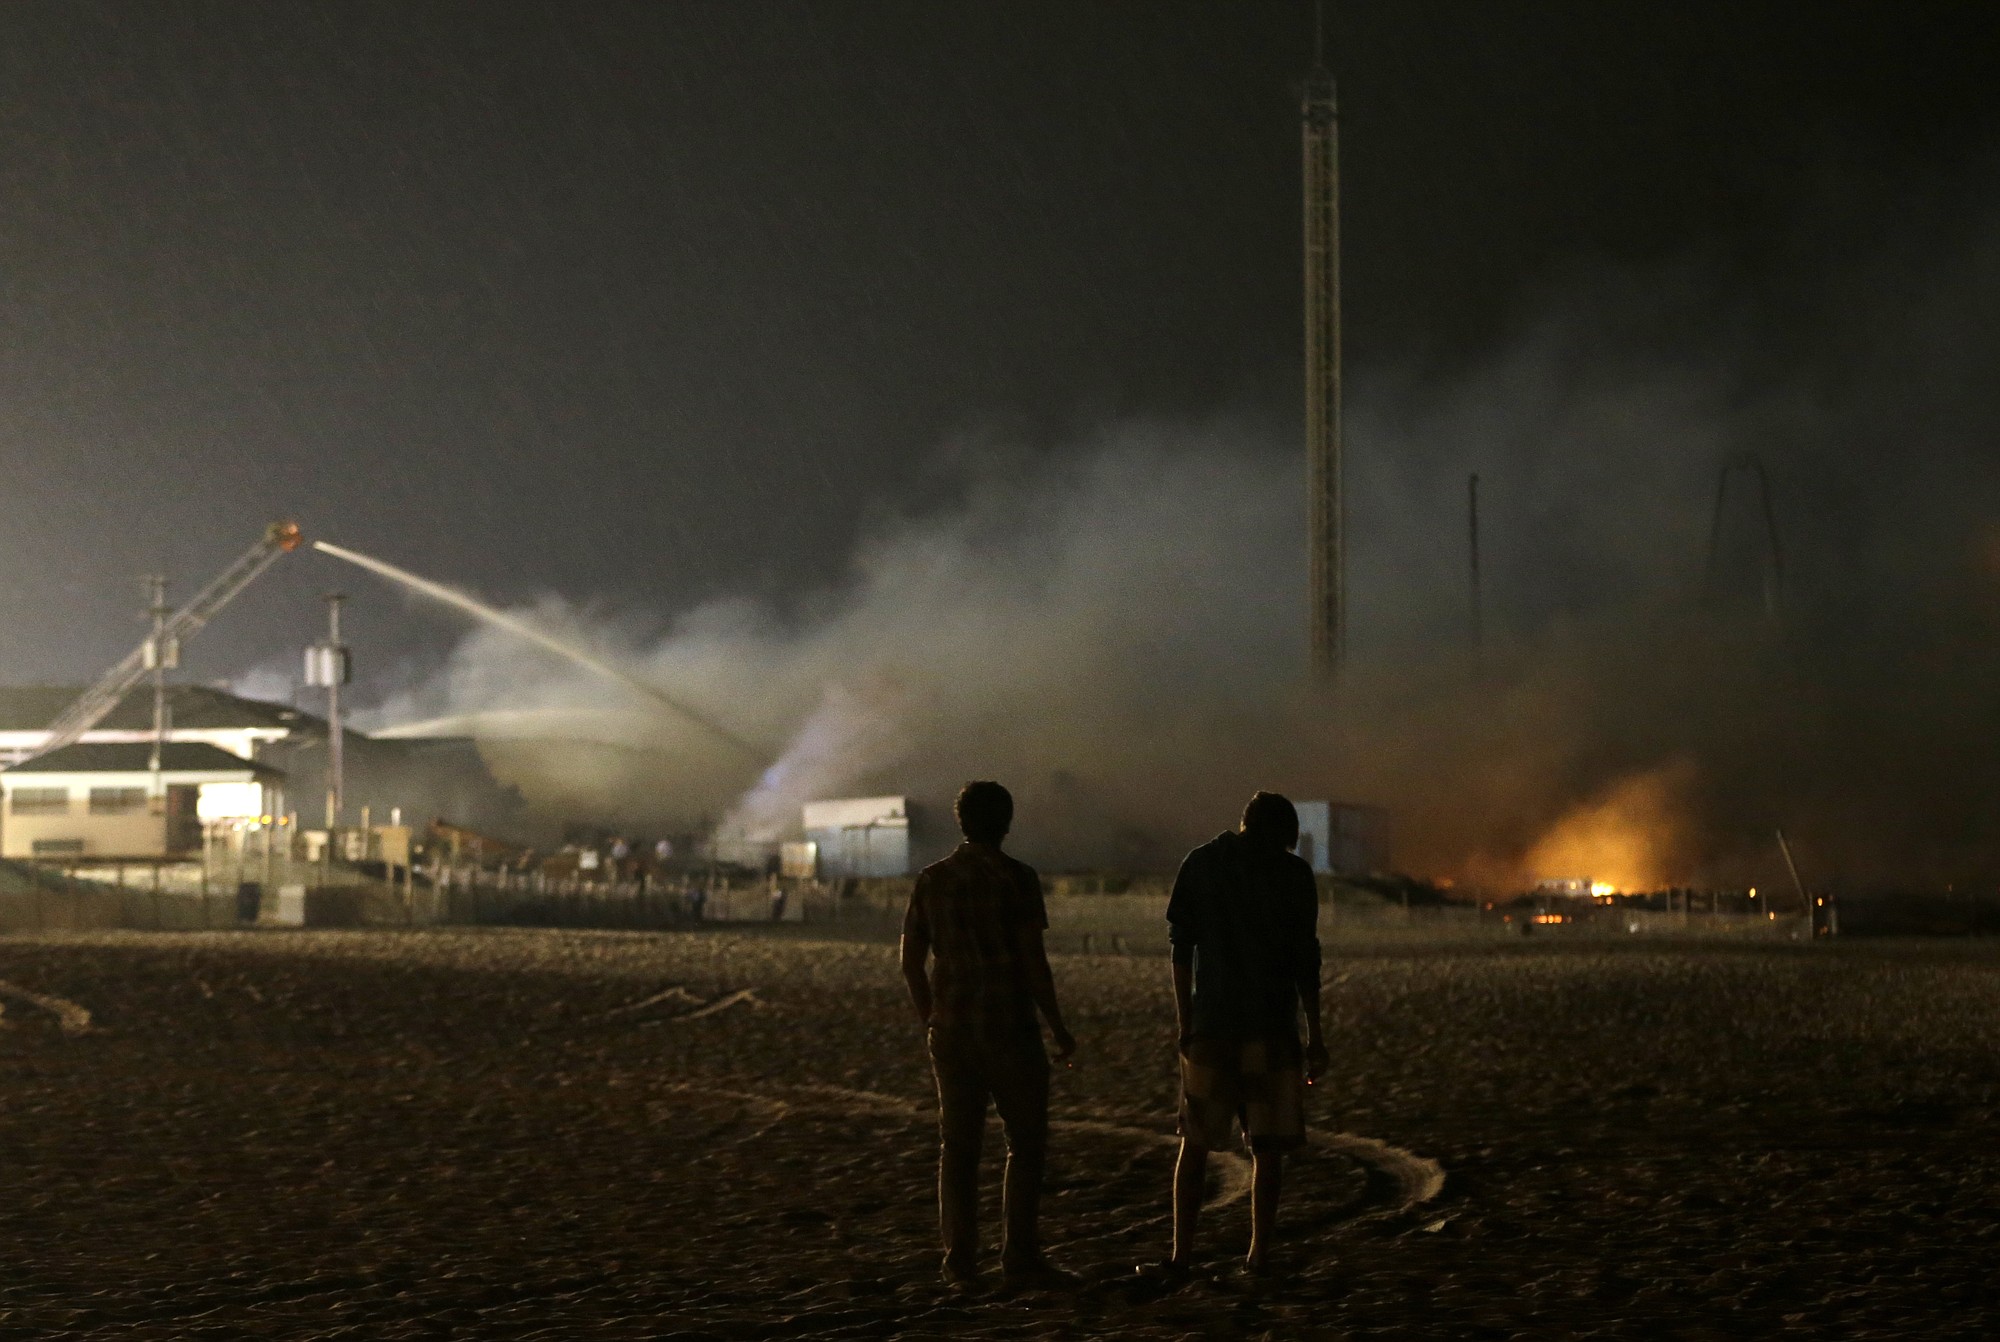 Nicholas Wey, 18, left, and his best friend Peter Irler, 18, both from Toms River, N.J., stand on the beach while looking at a fire that burns a large portion of the Seaside Park boardwalk Thursday in Seaside Park, N.J. The fire, which apparently started in the area of an ice cream shop and spread several blocks, hit the recently repaired boardwalk, which was damaged last year by Superstorm Sandy.